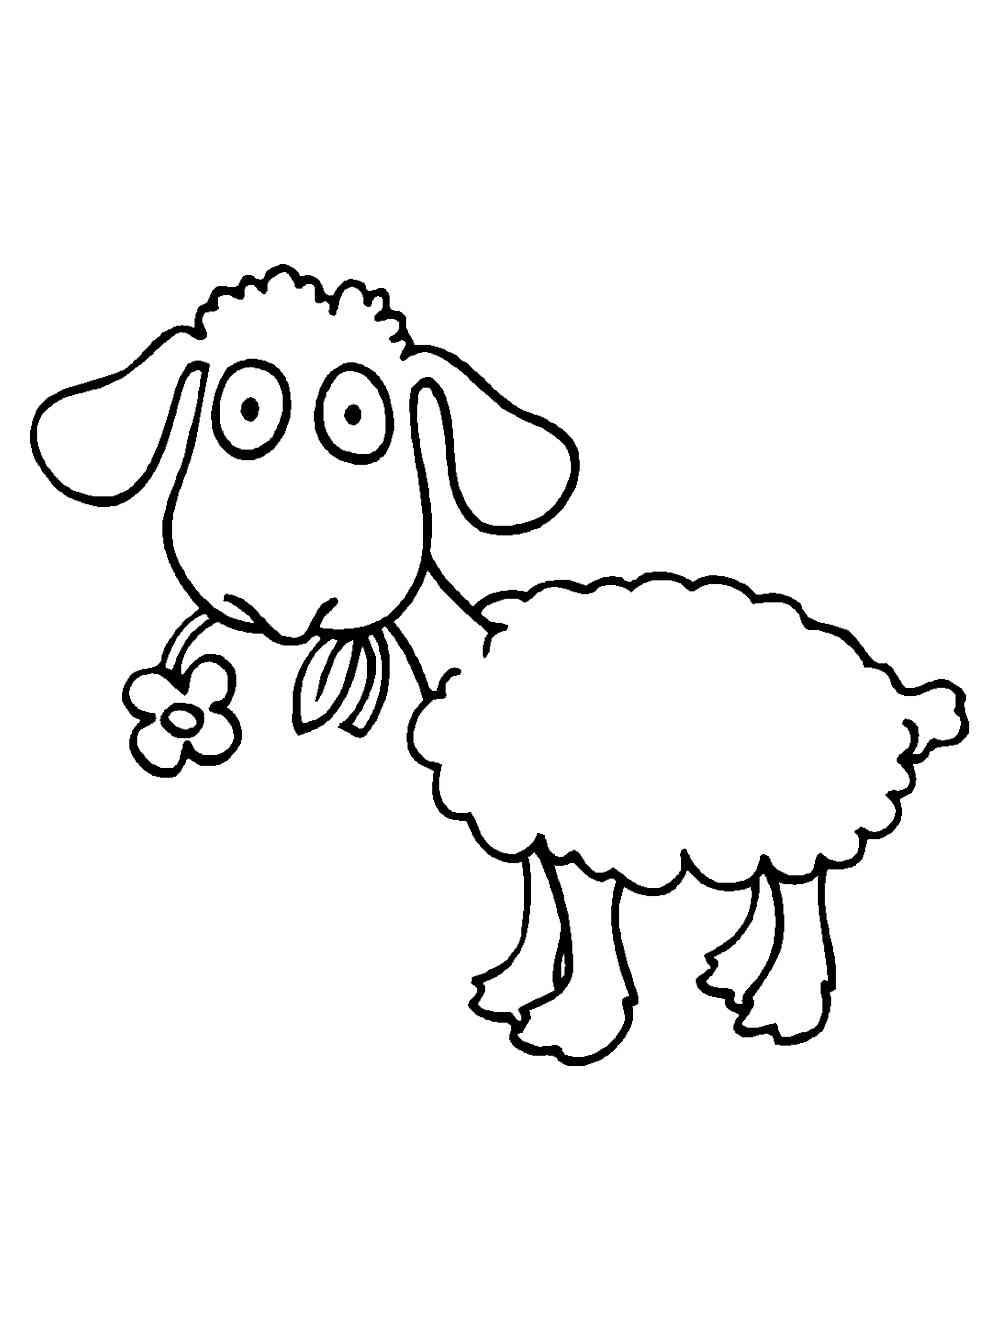 Sheep eating Flower coloring page